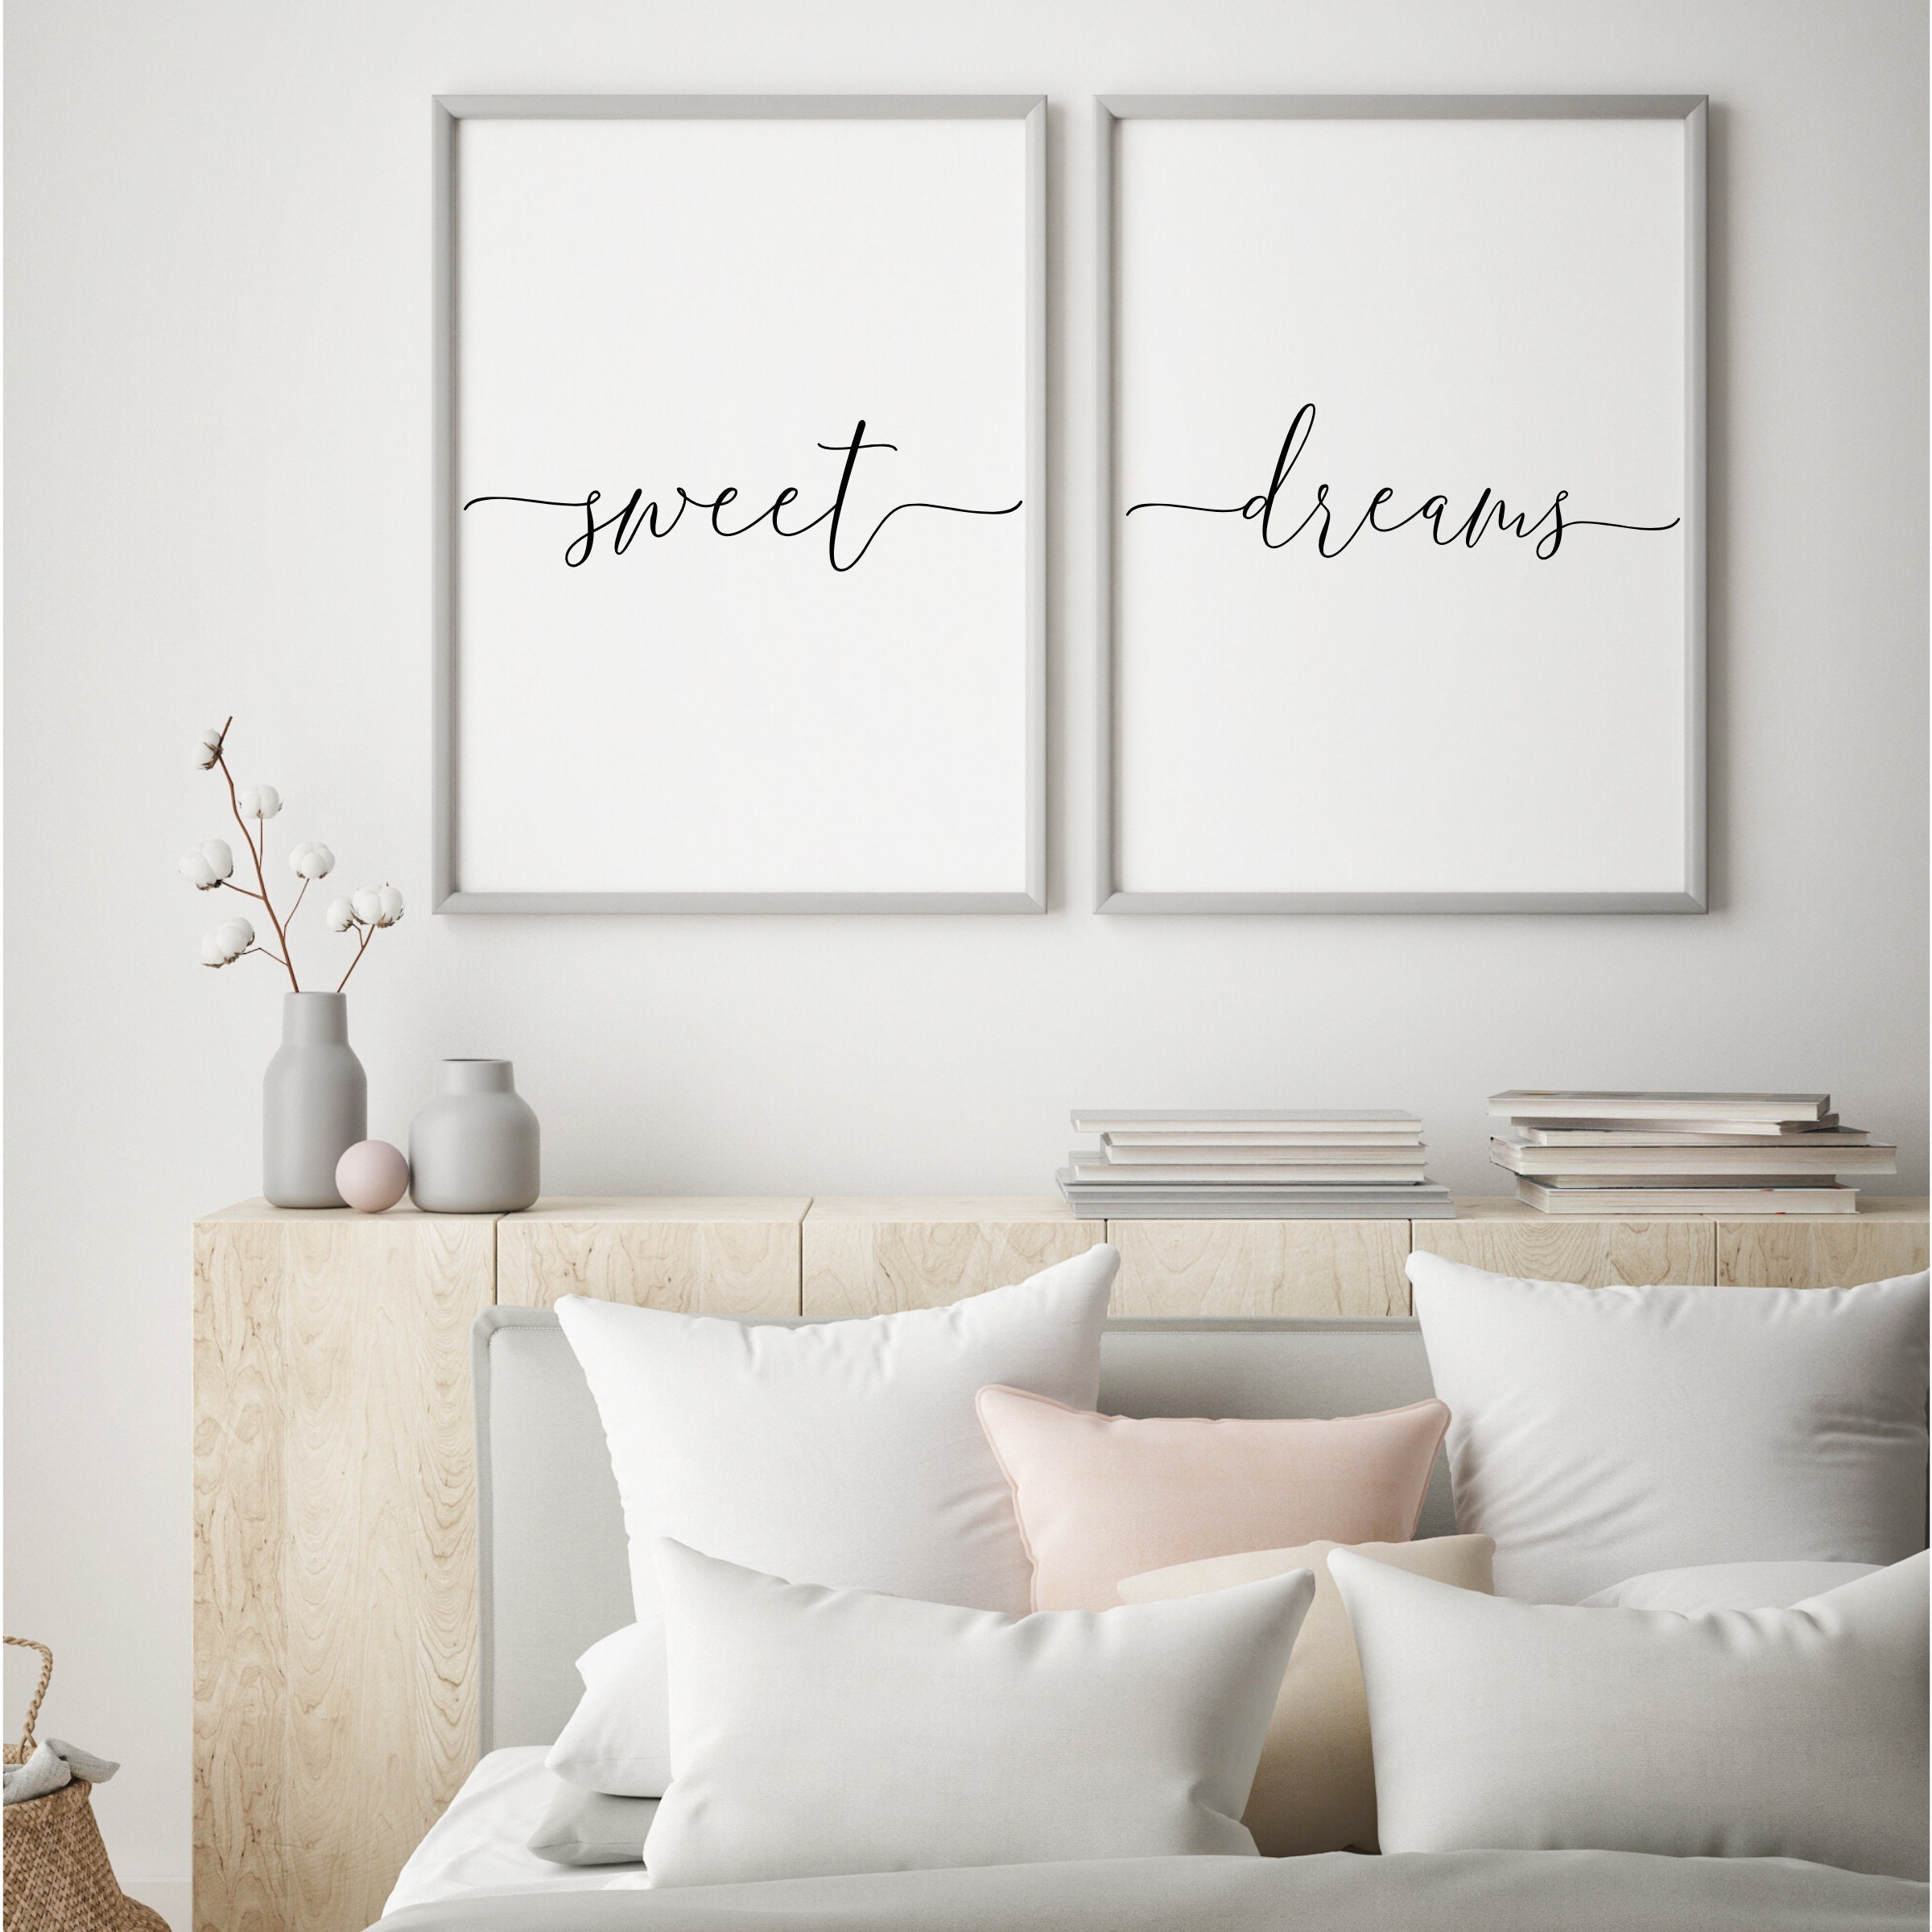 Sweet Dreams Makes a Great Bedroom Decor Under $25 Set of Two 11x14 Unframed Typography Art Prints 